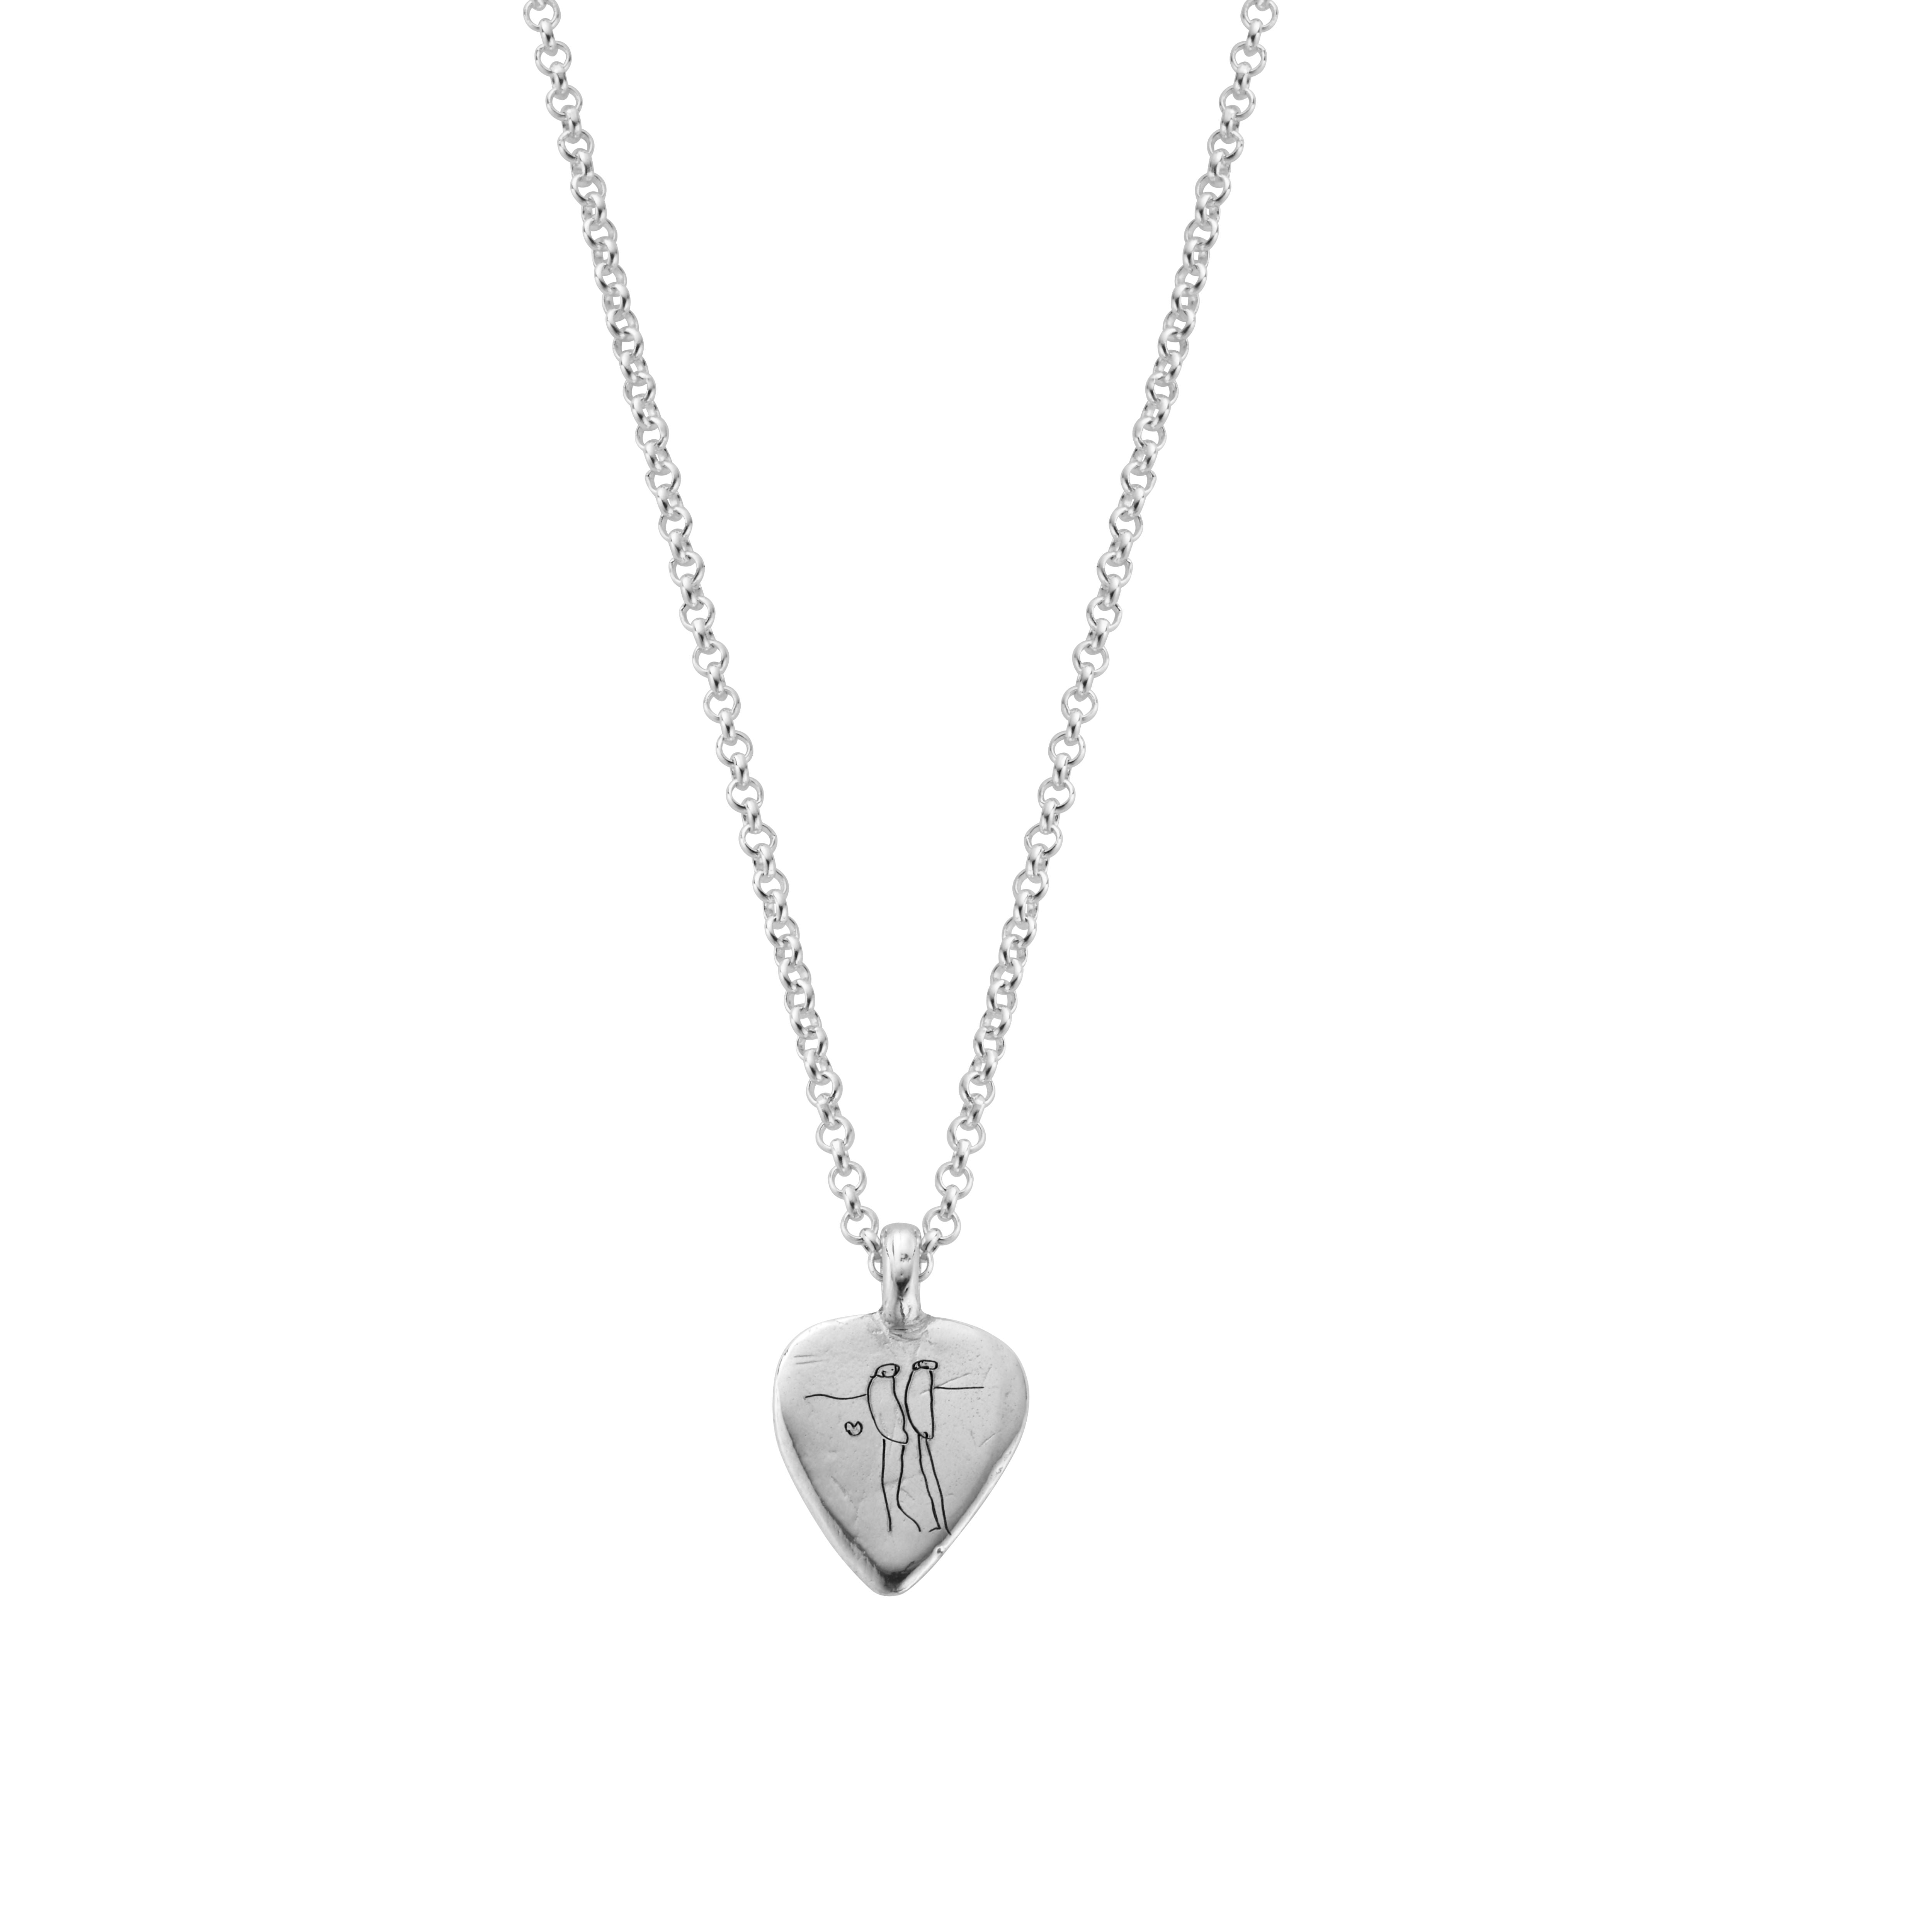 Personalised Handwritten Message Heart Necklace | Silver or Gold - Hold  upon Heart